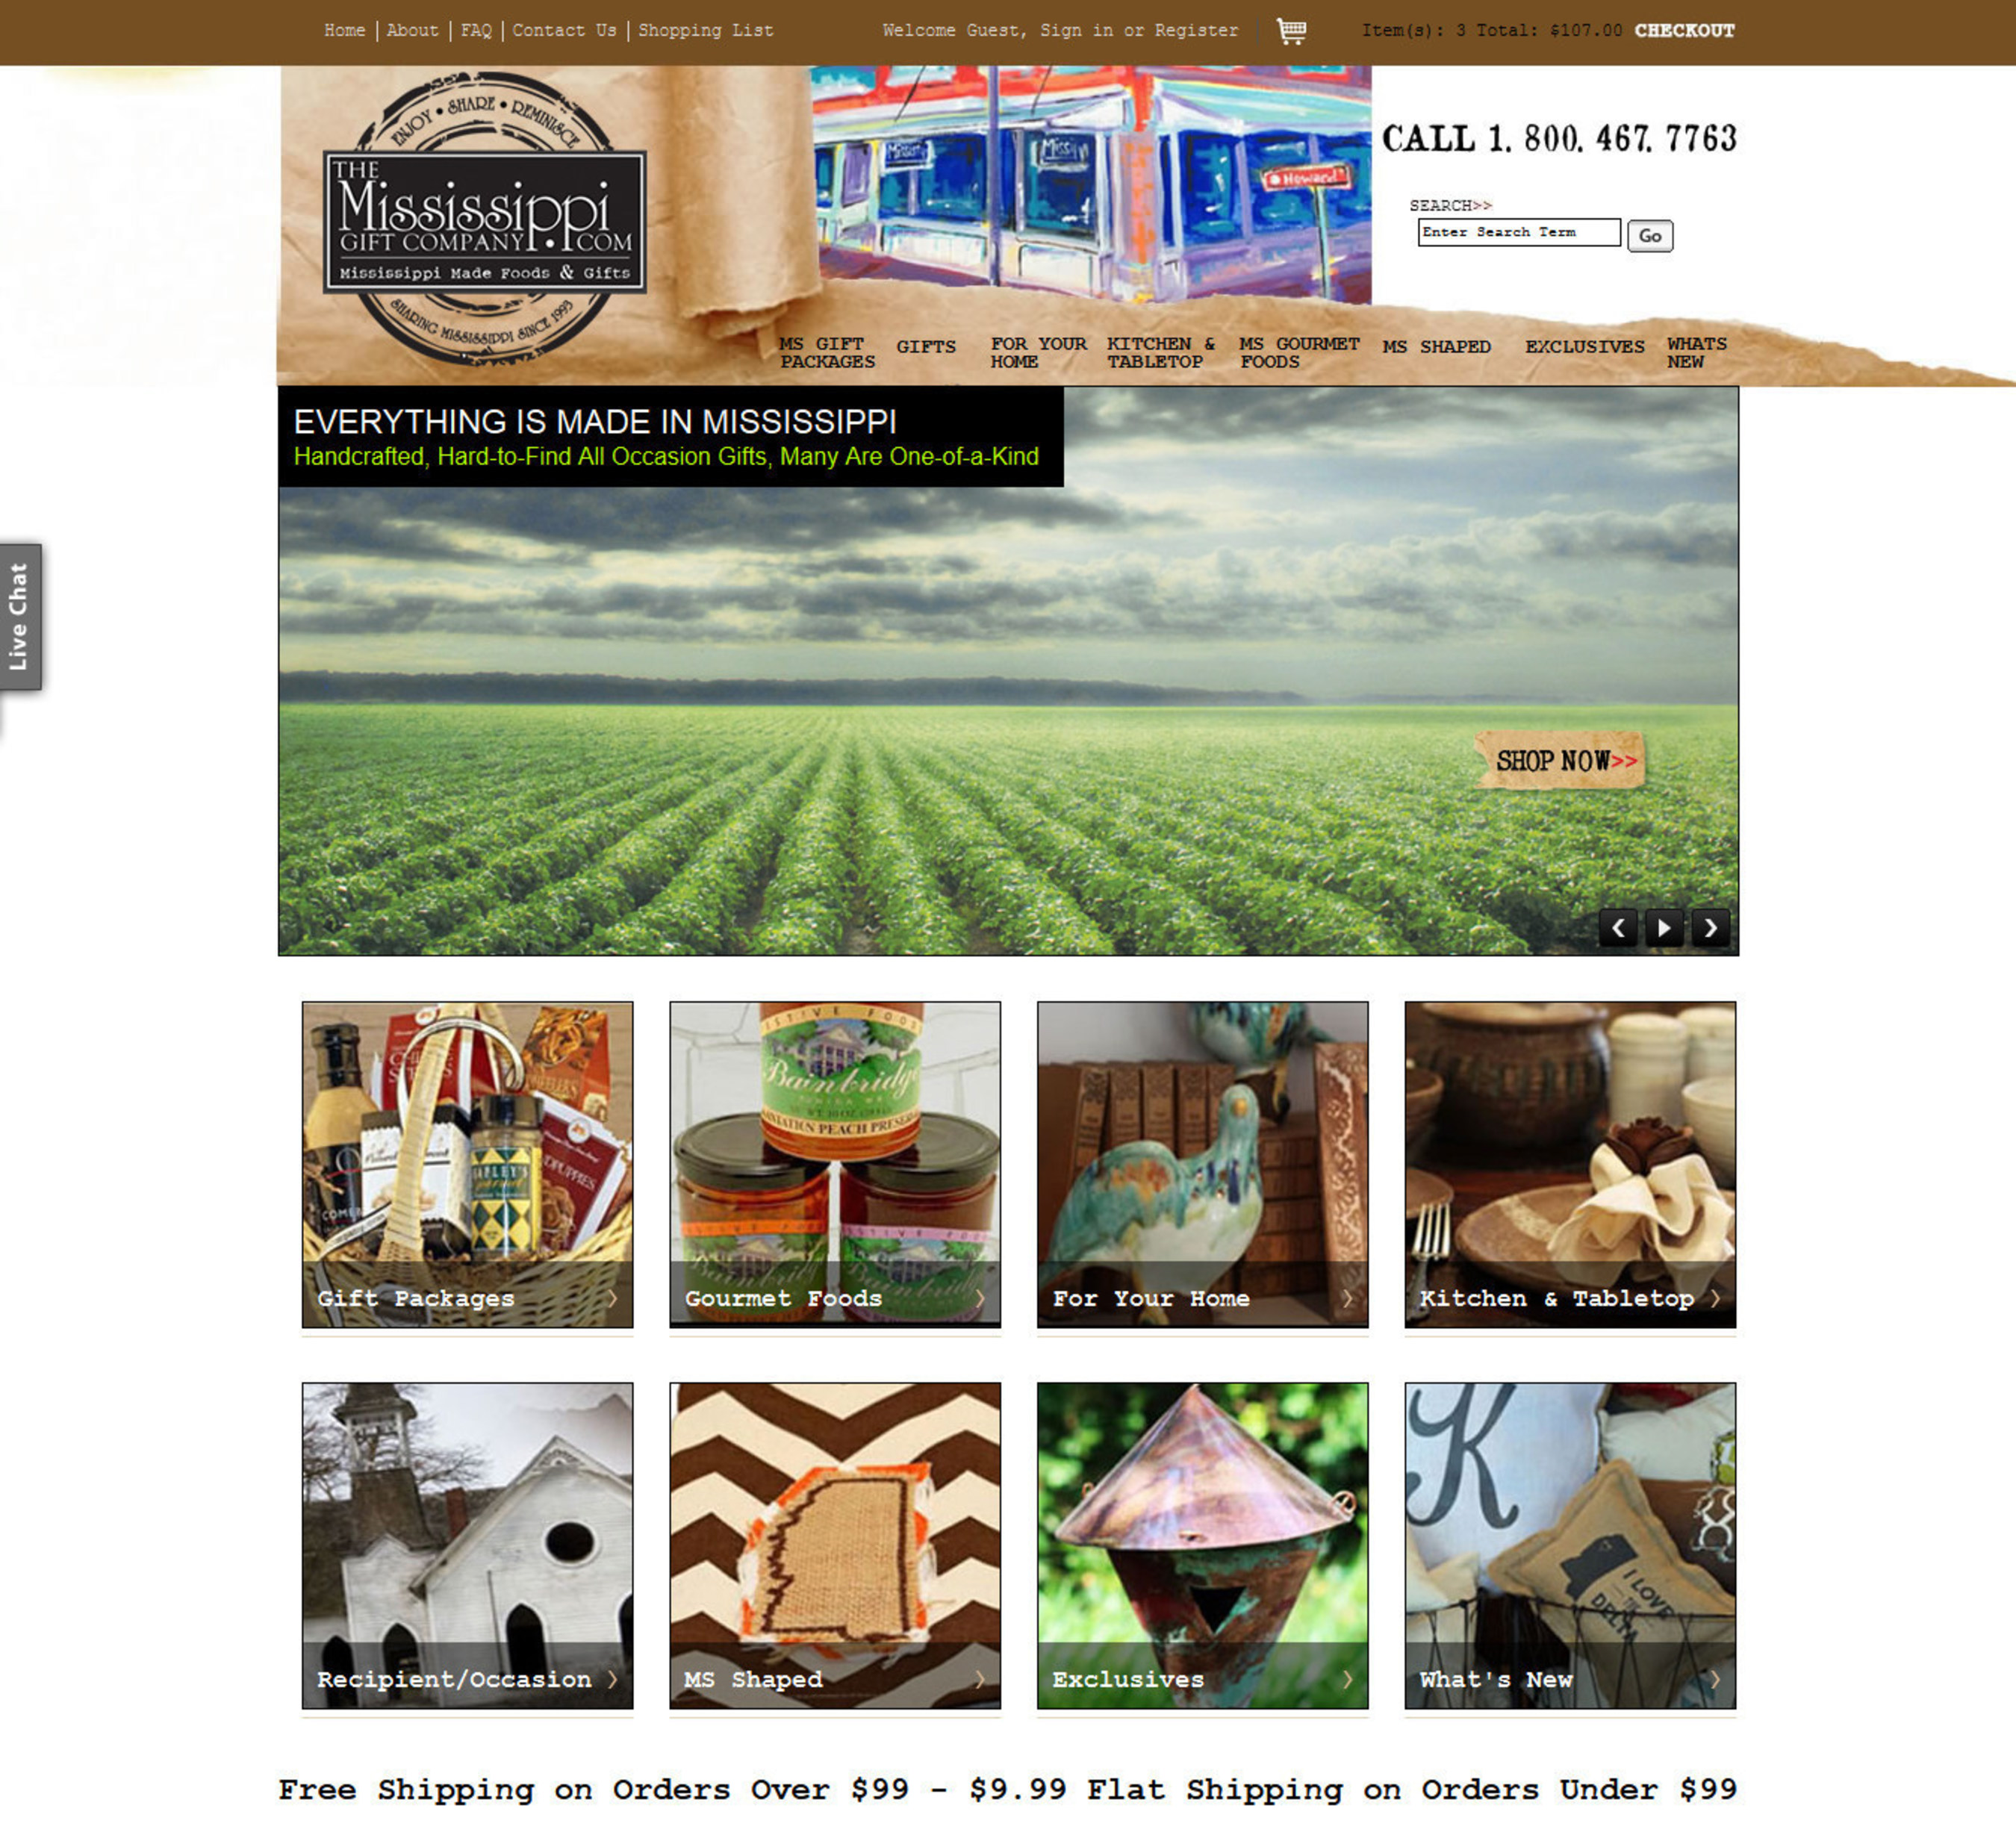 New Site Features Mississippi Made Foods, Gifts and Home Decor